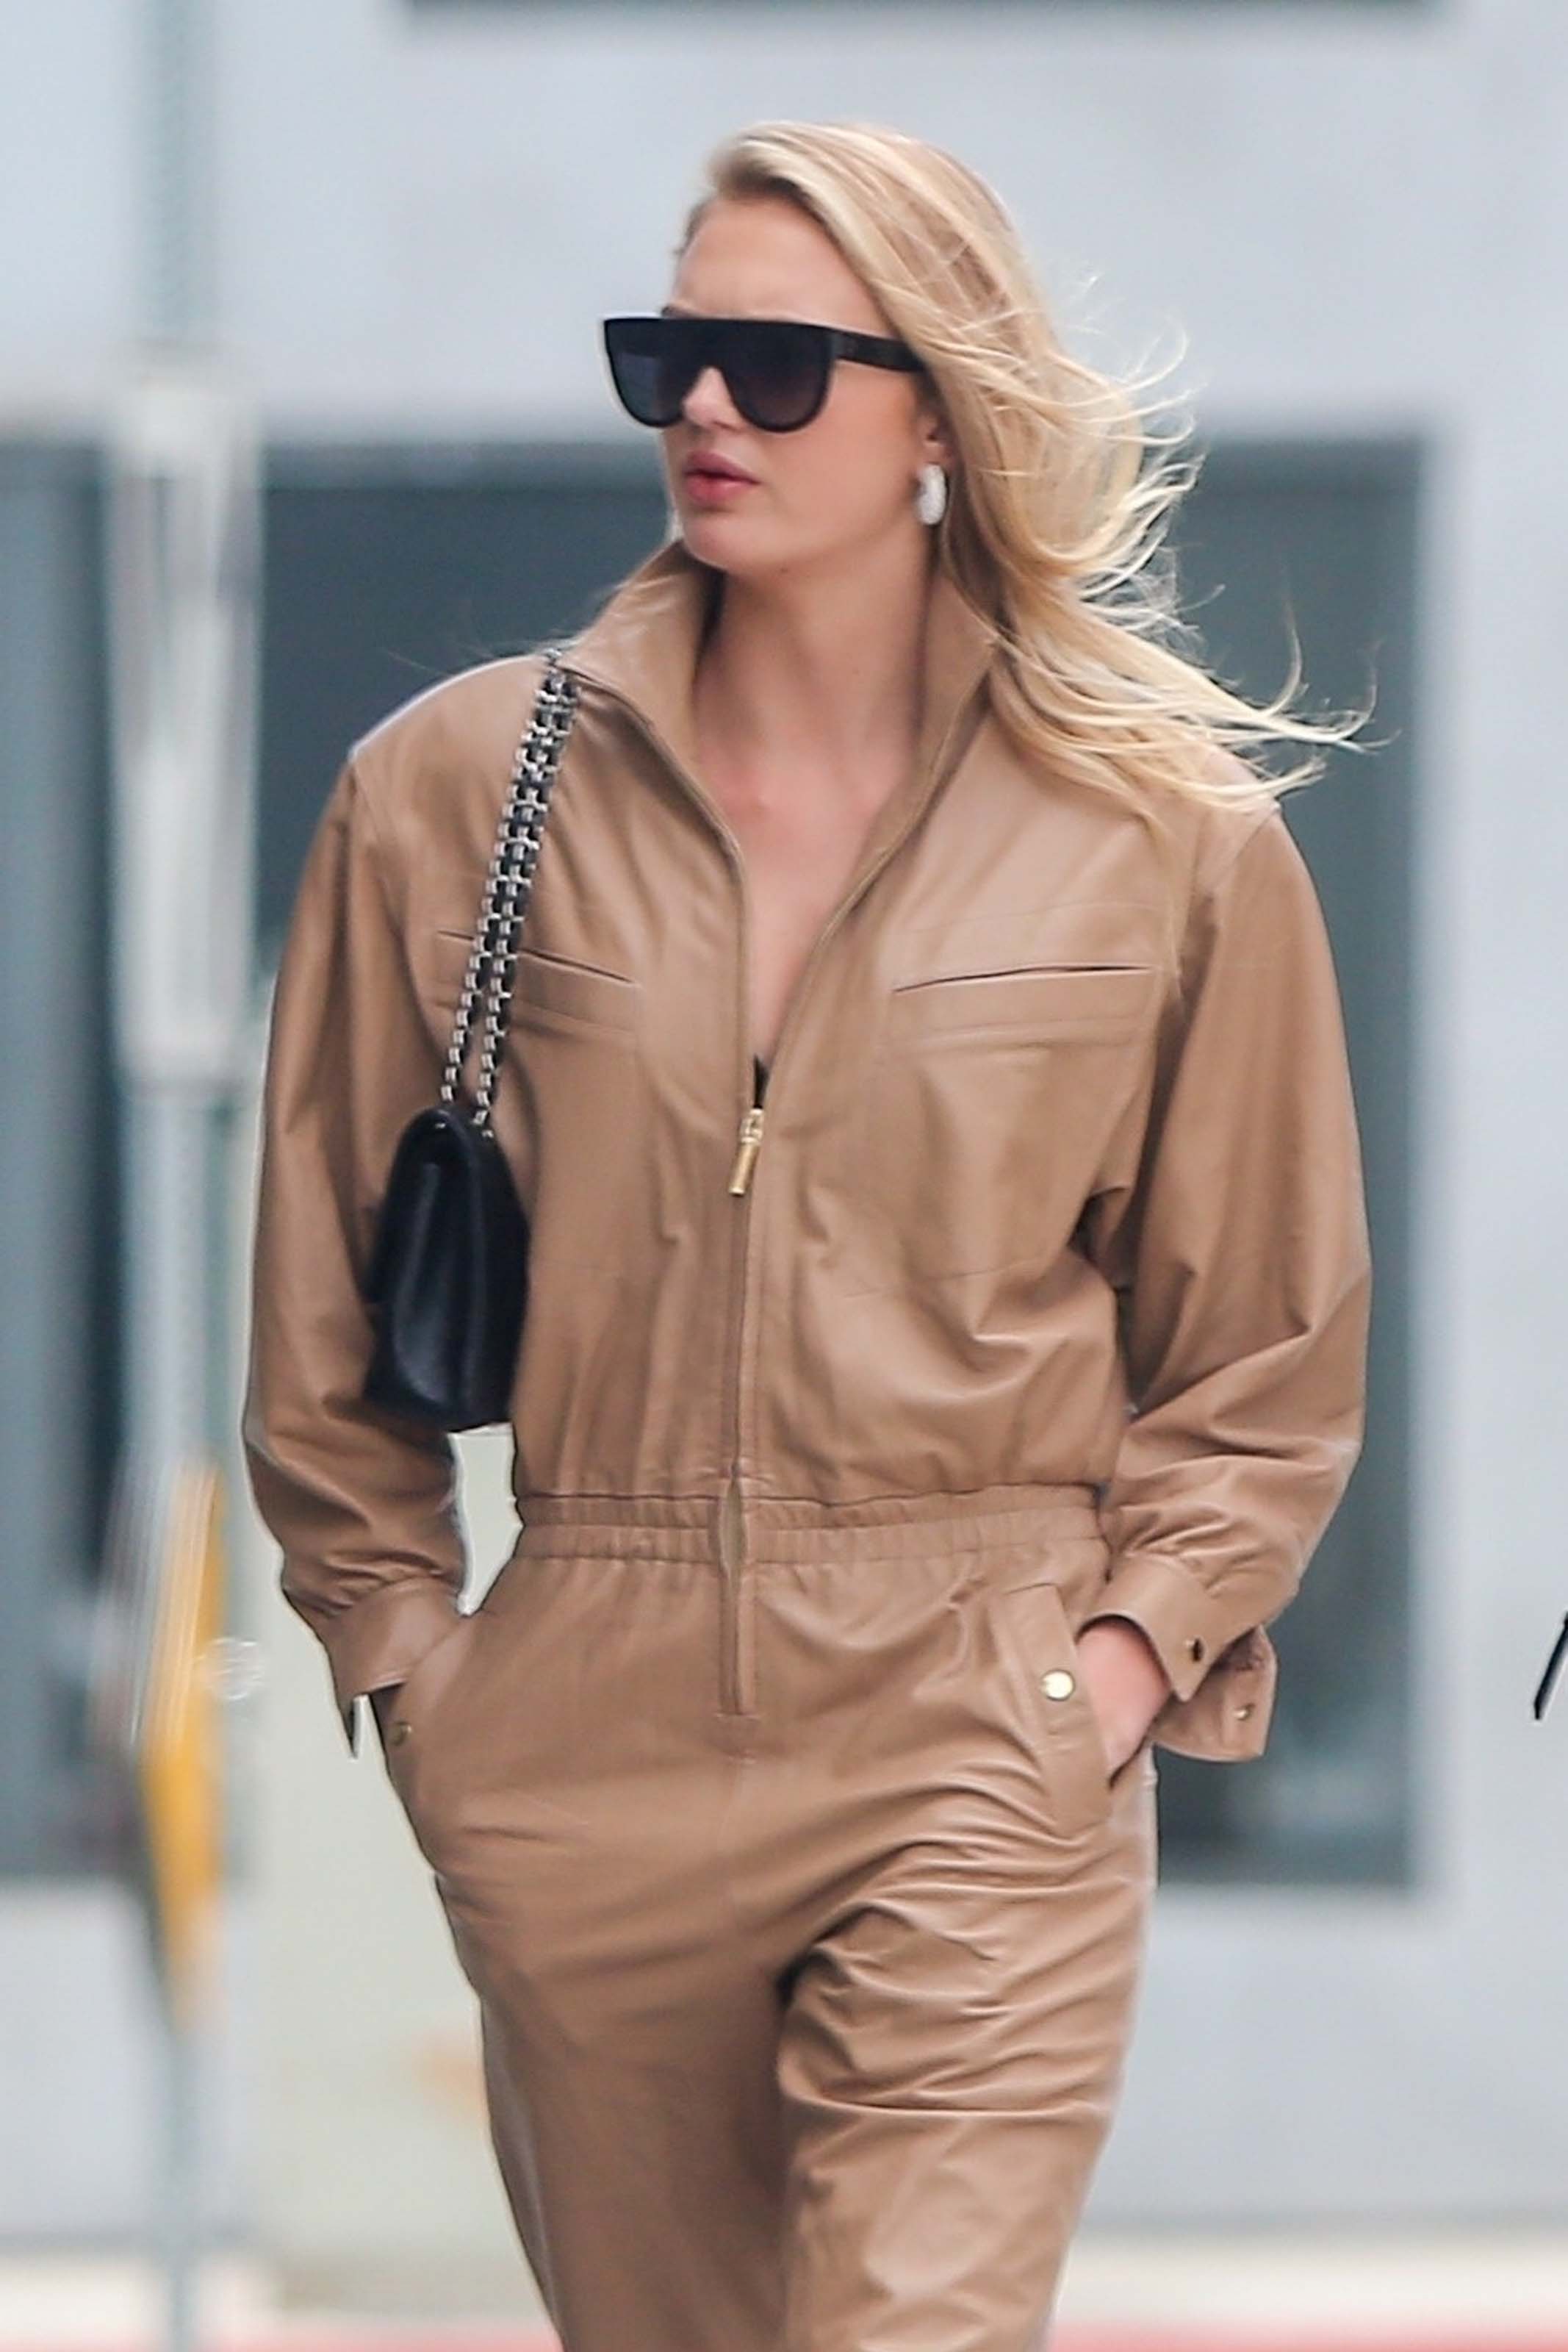 Romee Strijd out for lunch in LA